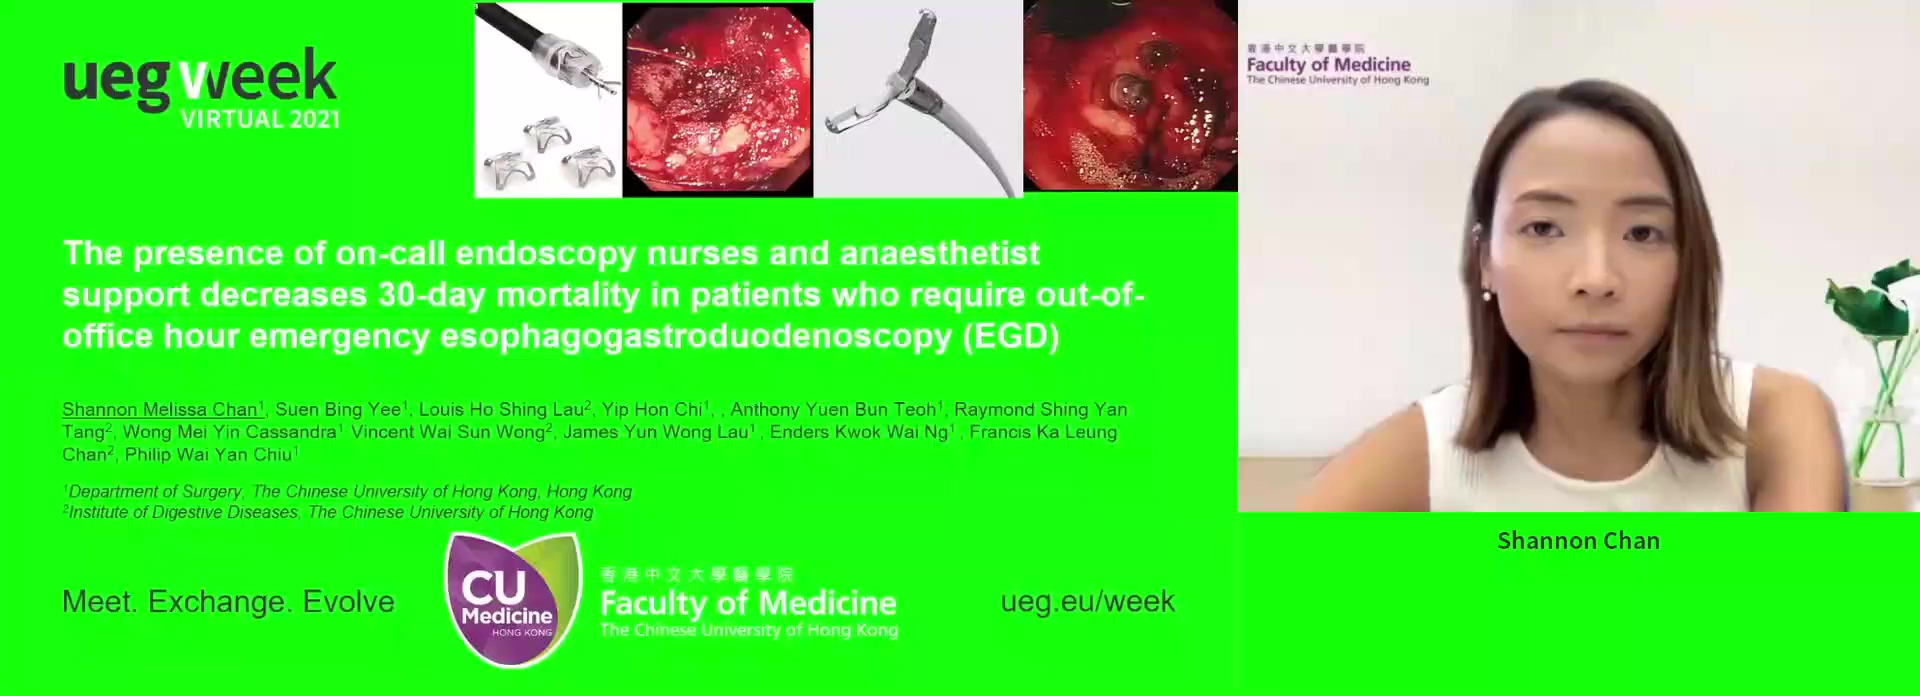 THE PRESENCE OF ON-CALL ENDOSCOPY NURSES DECREASES 30-DAY MORTALITY IN PATIENTS WHO REQUIRE OUT-OF-OFFICE HOUR EMERGENCY ESOPHAGOGASTRODUODENOSCOPY (EGD)